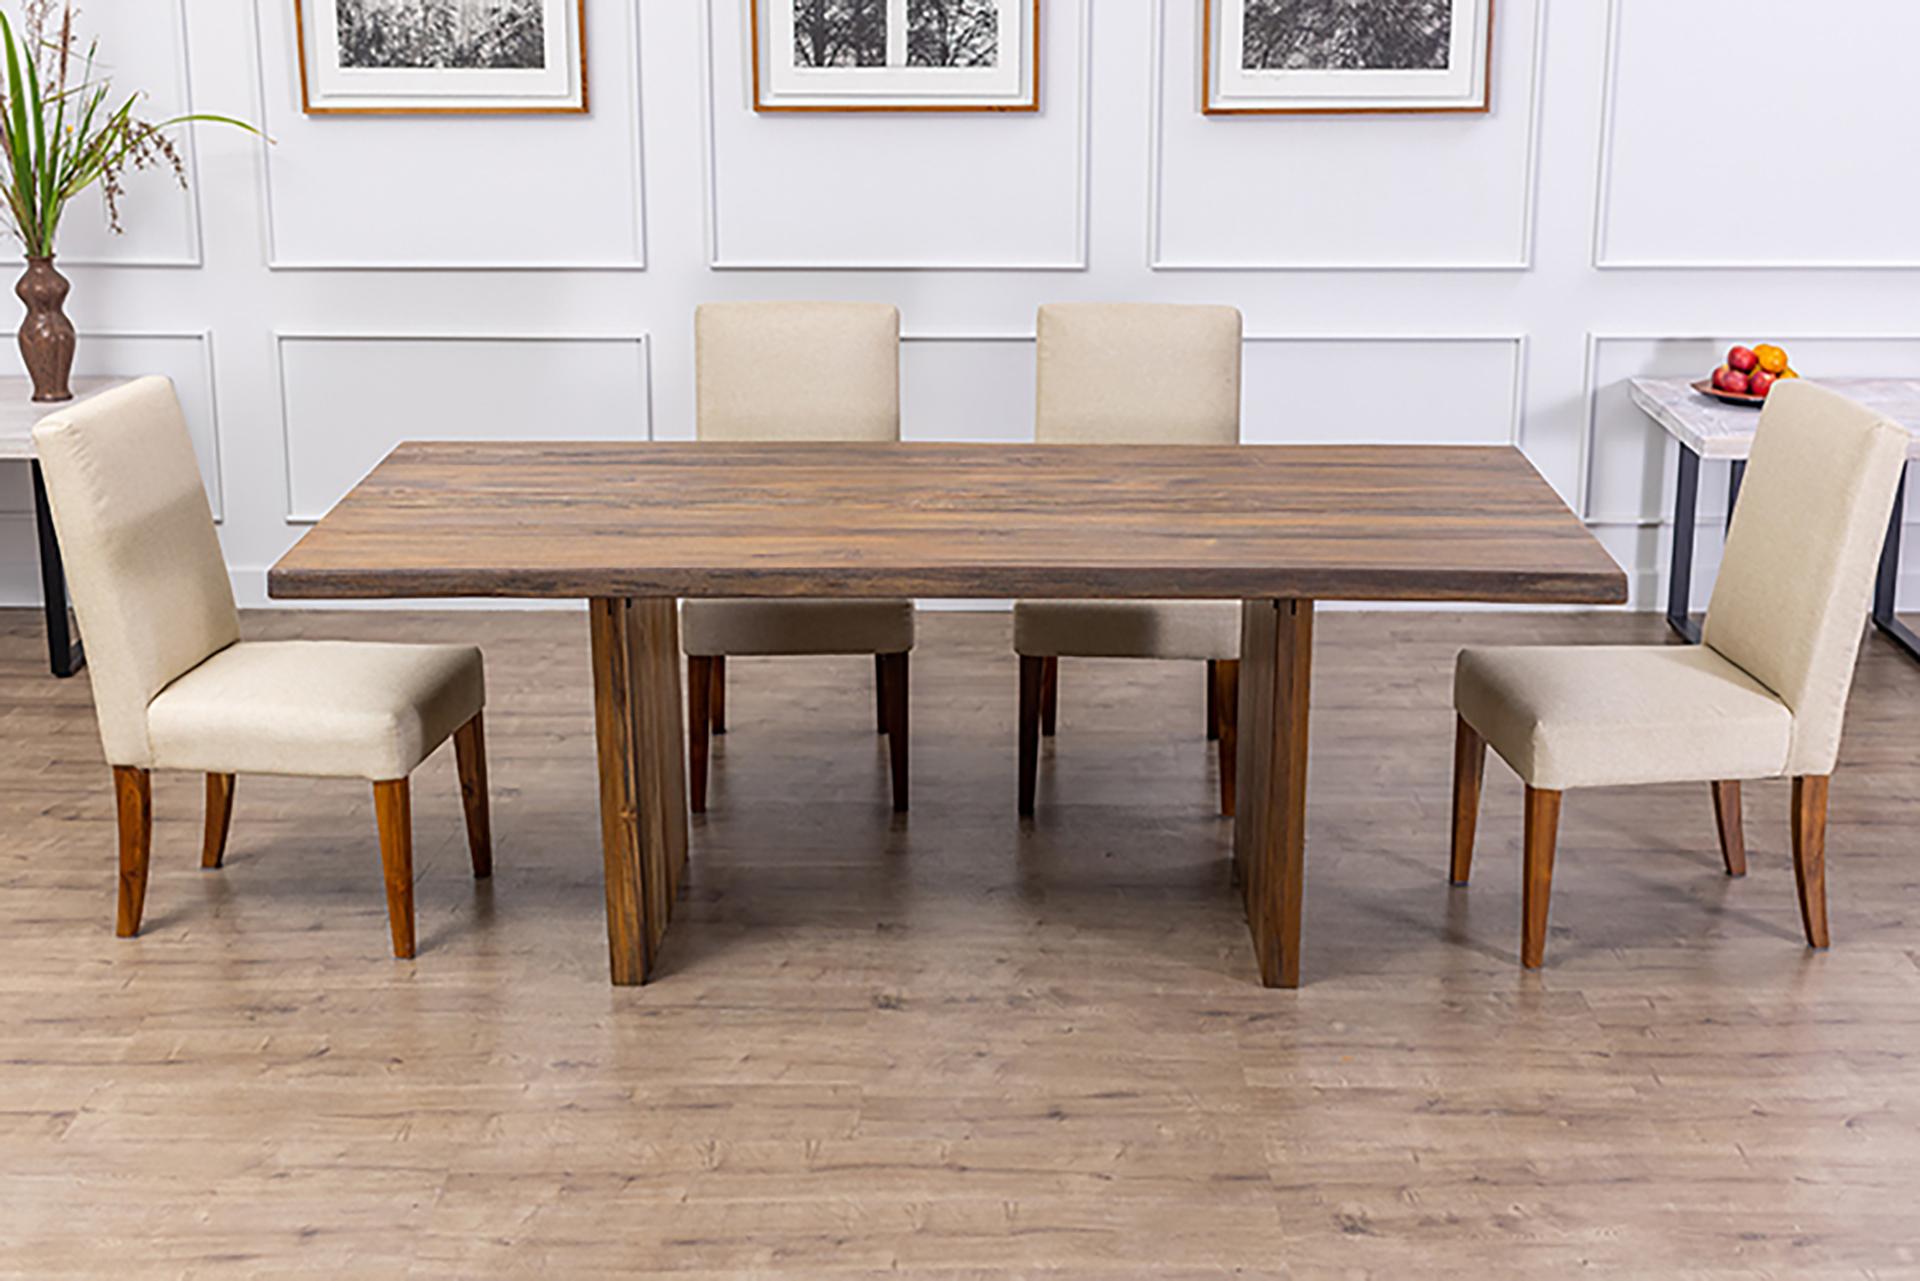 The Table Company makes only 100% solid, hardwood furniture. We primarily use Thai/Burmese Teak, North American Red and White Oak, and old-growth Cham-Cha (Siam Acacia). 
Wood preparation is very important, all of our wood is kiln-dried to